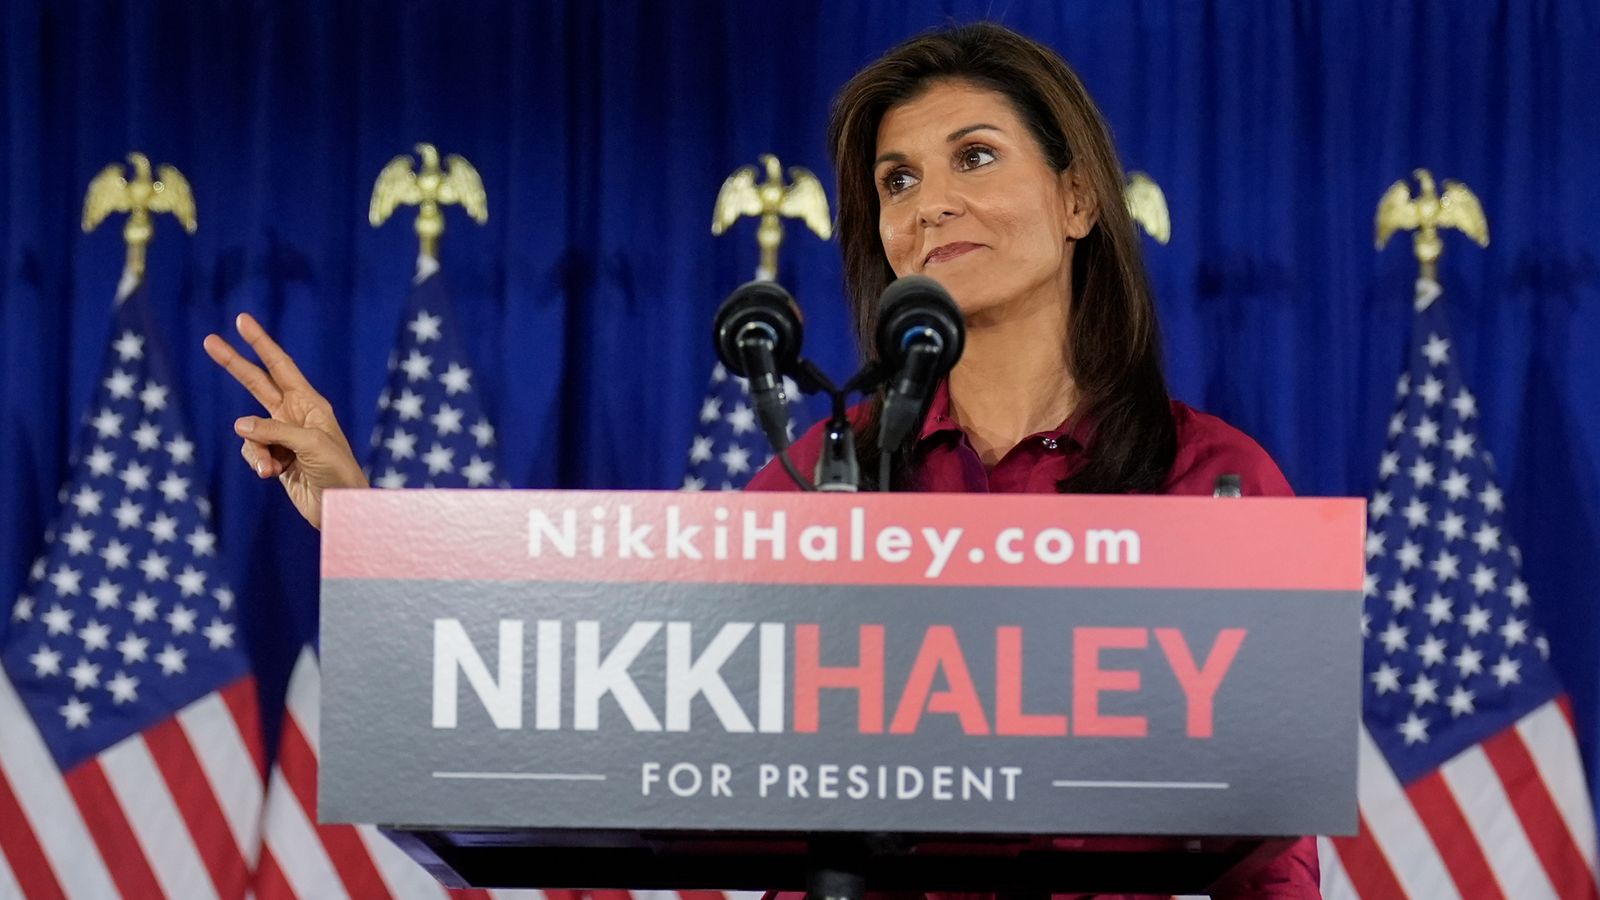 Nikki Haley says she will only debate Donald Trump as crucial New Hampshire primary approaches